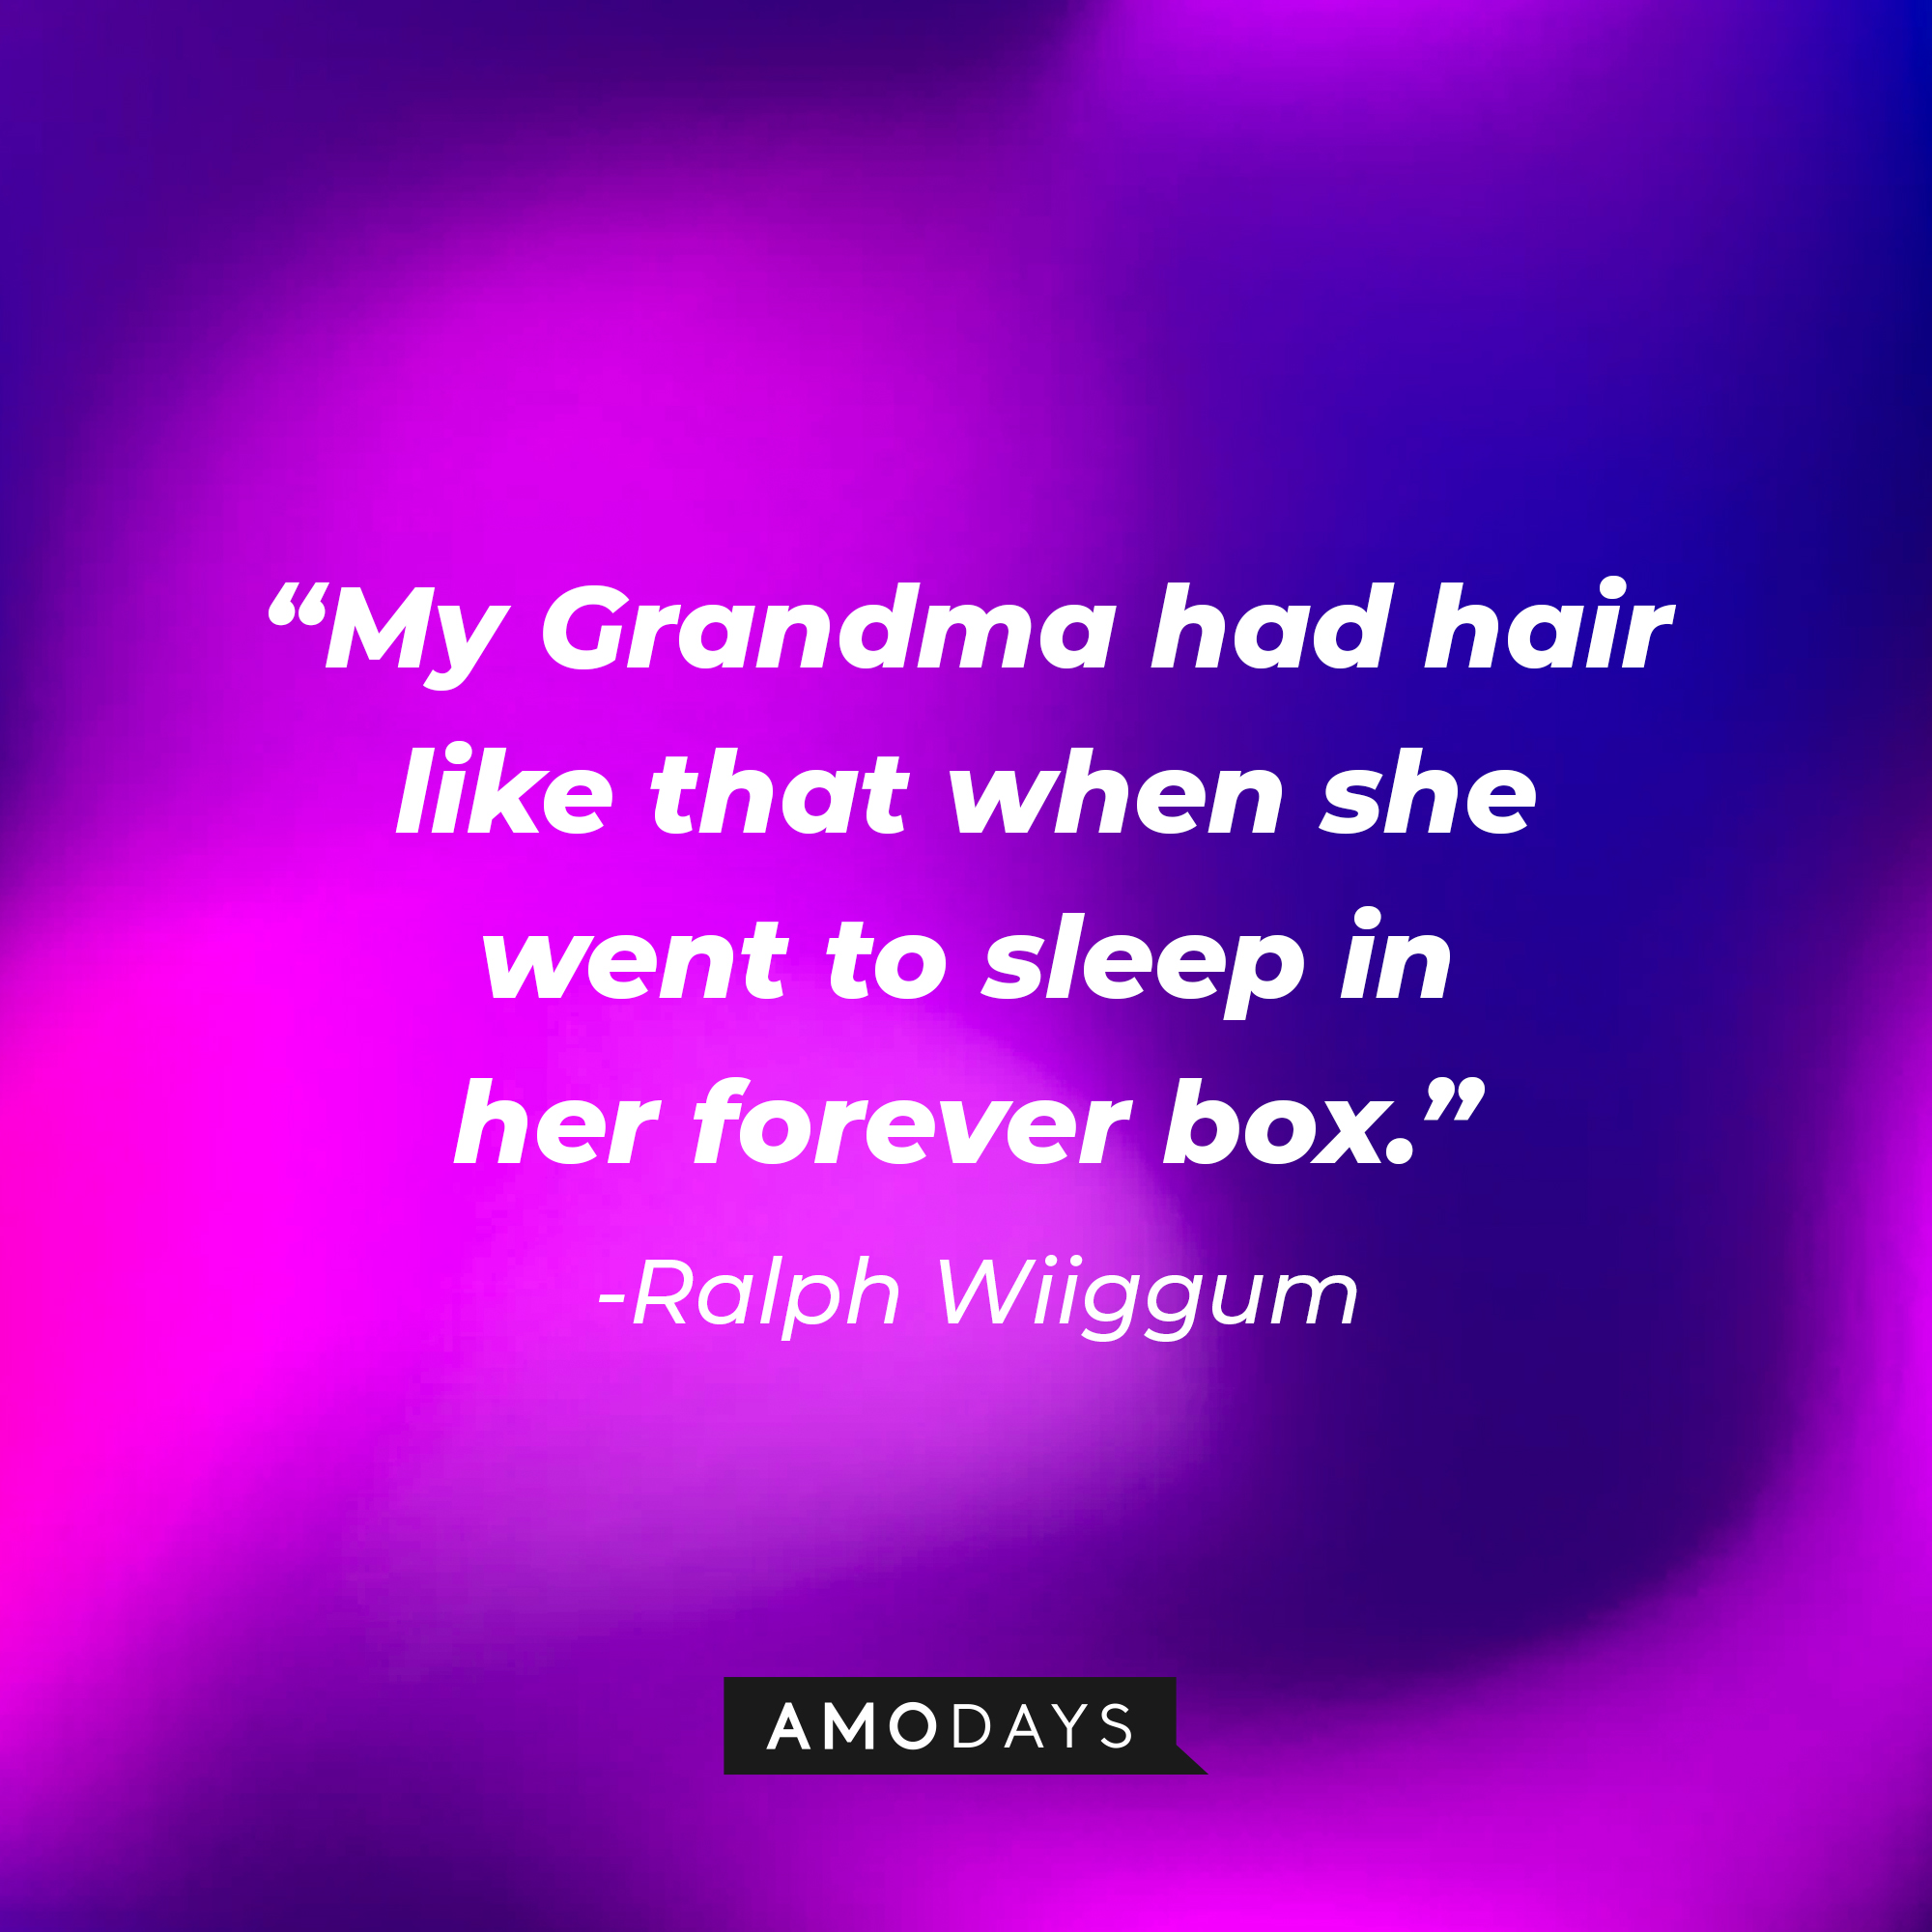 Ralph Wiiggum’s quote: “My Grandma had hair like that when she went to sleep in her forever box.”  |  Source: AmoDays